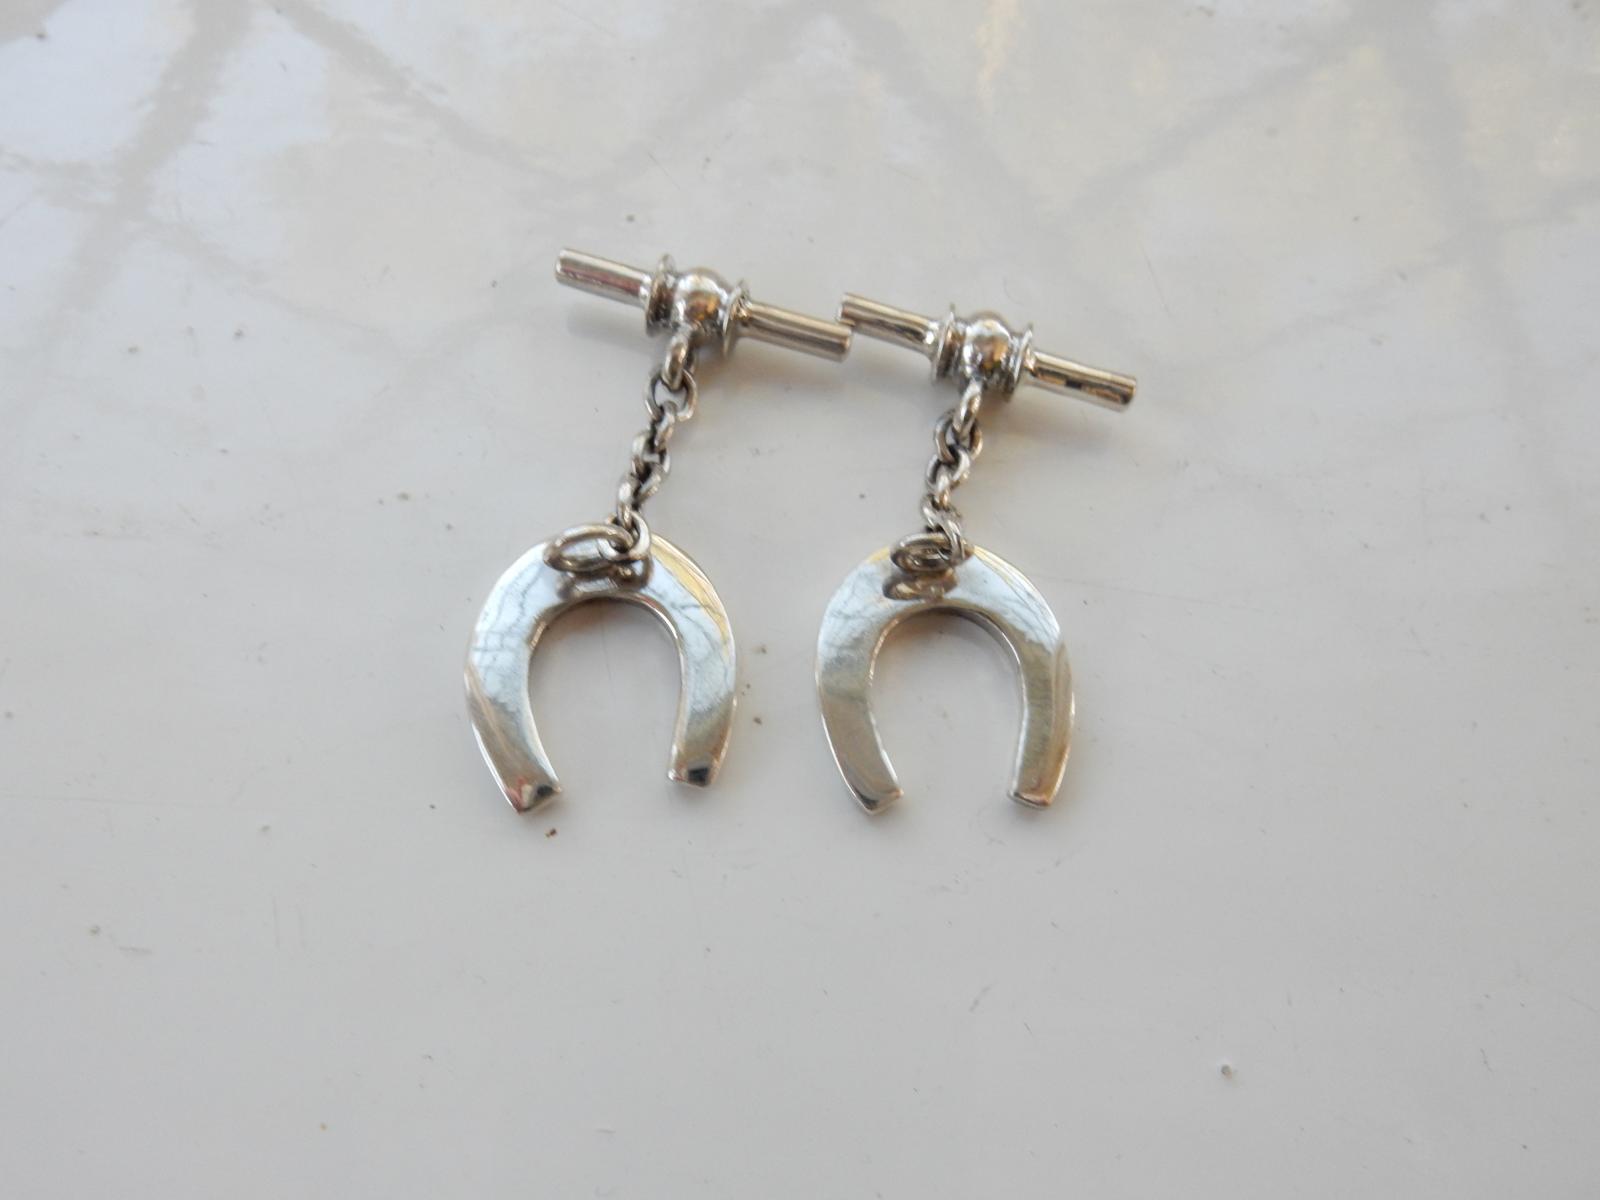 Photo of Pair Sterling Silver Horse Shoe Cufflinks